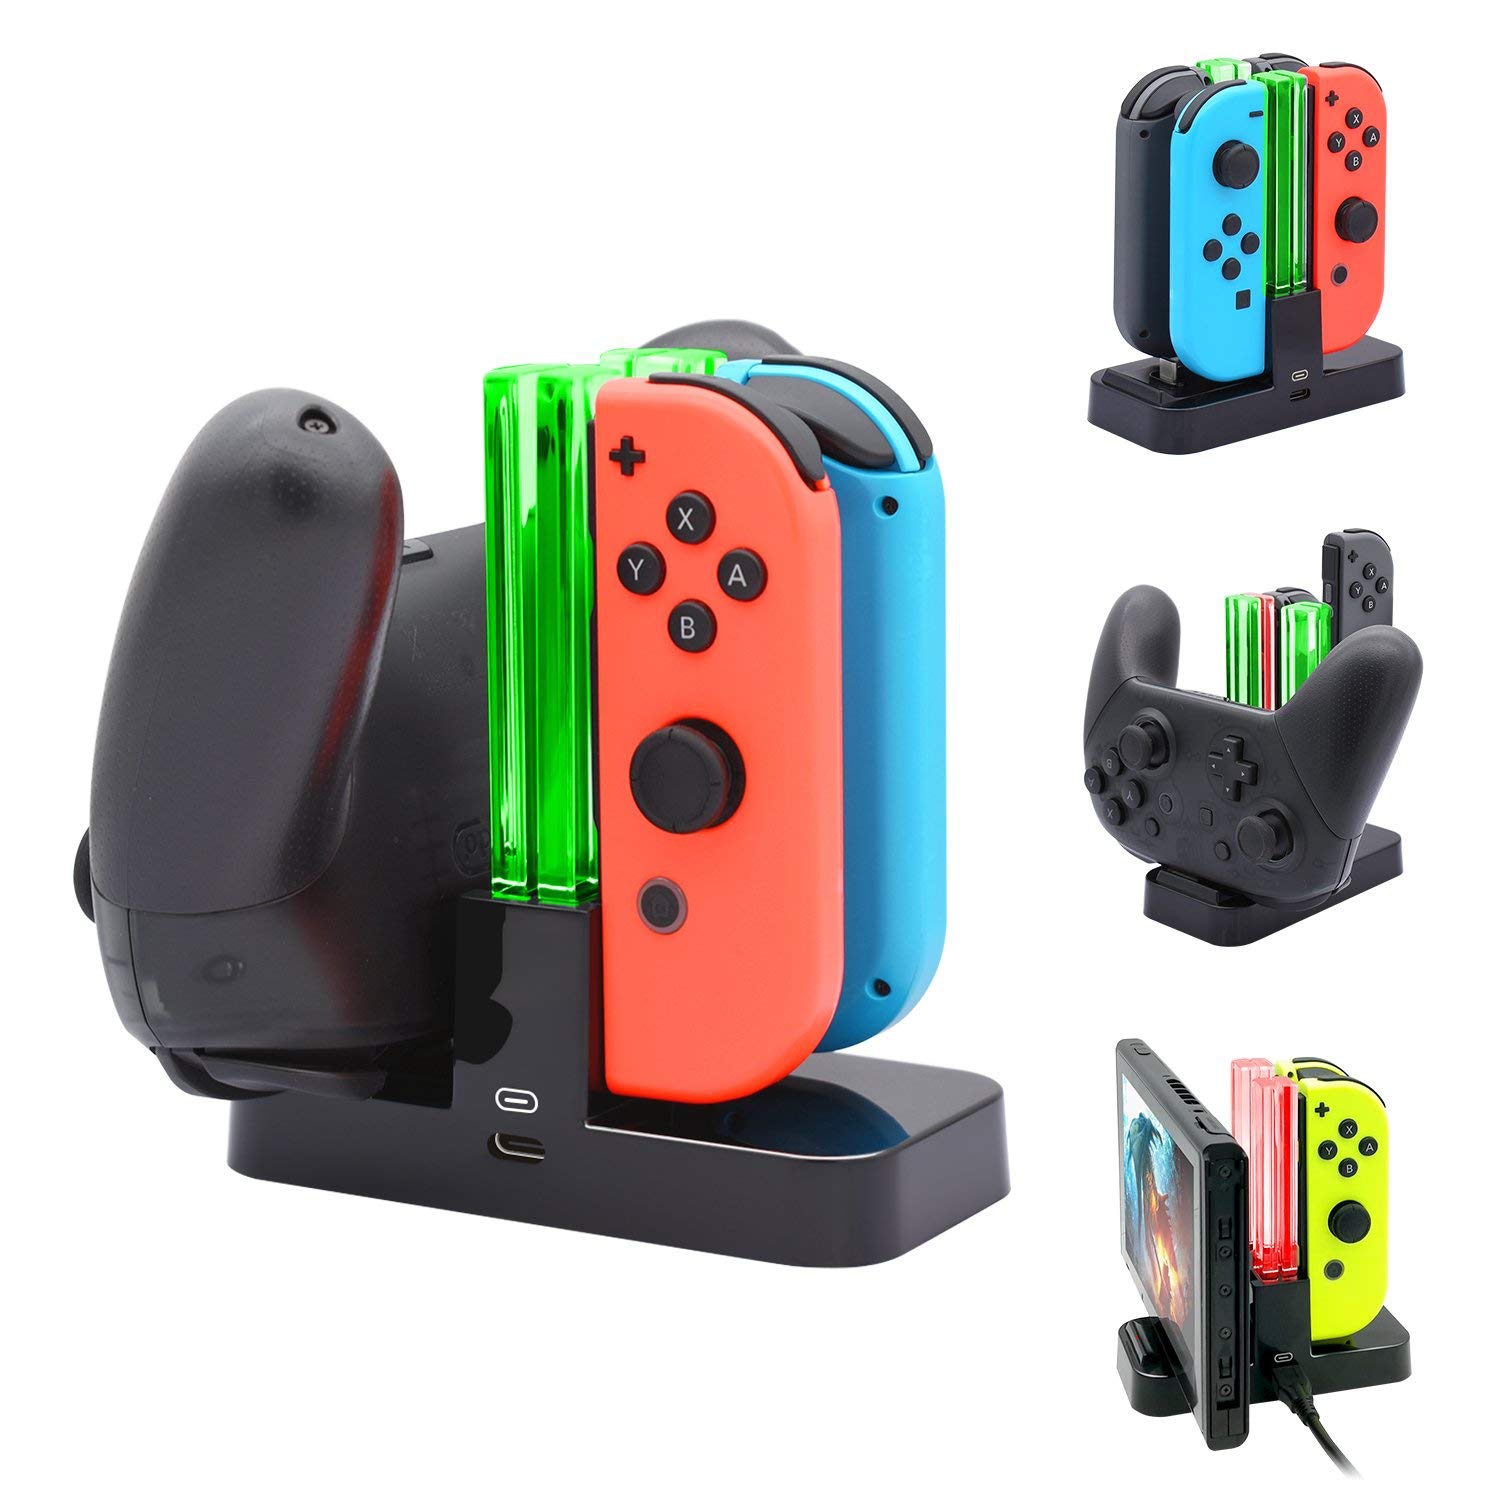 Charging Dock for Pro Controller, Joy-Con & Nintendo Switch with Charging Indicator and Type C Charging Cable - Switch, Joycons and Pro Controller NOT INCLUDED